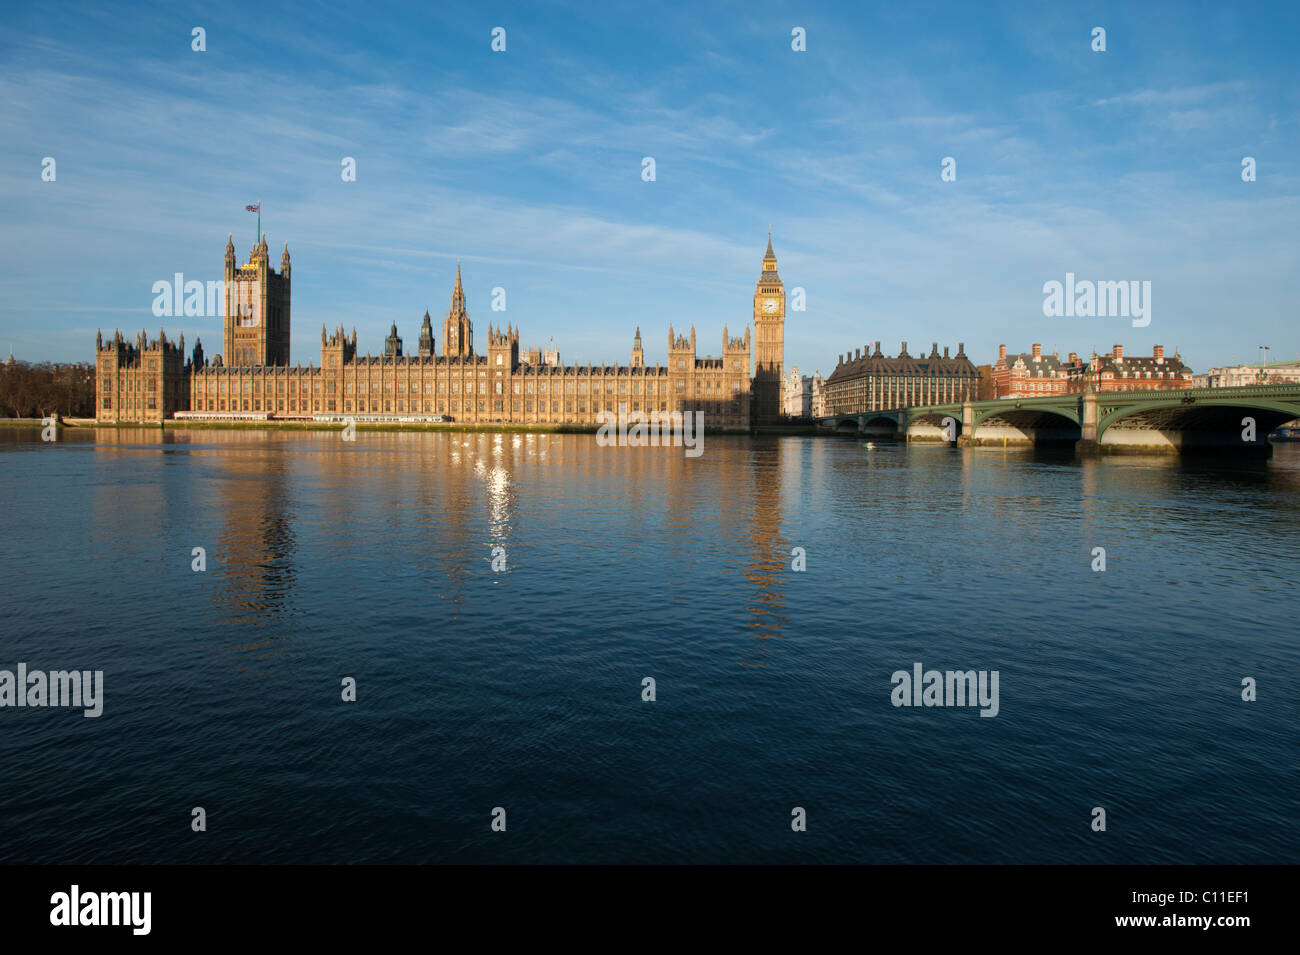 Die Houses of Parliament, am Ufer der Themse in London, England. Stockfoto